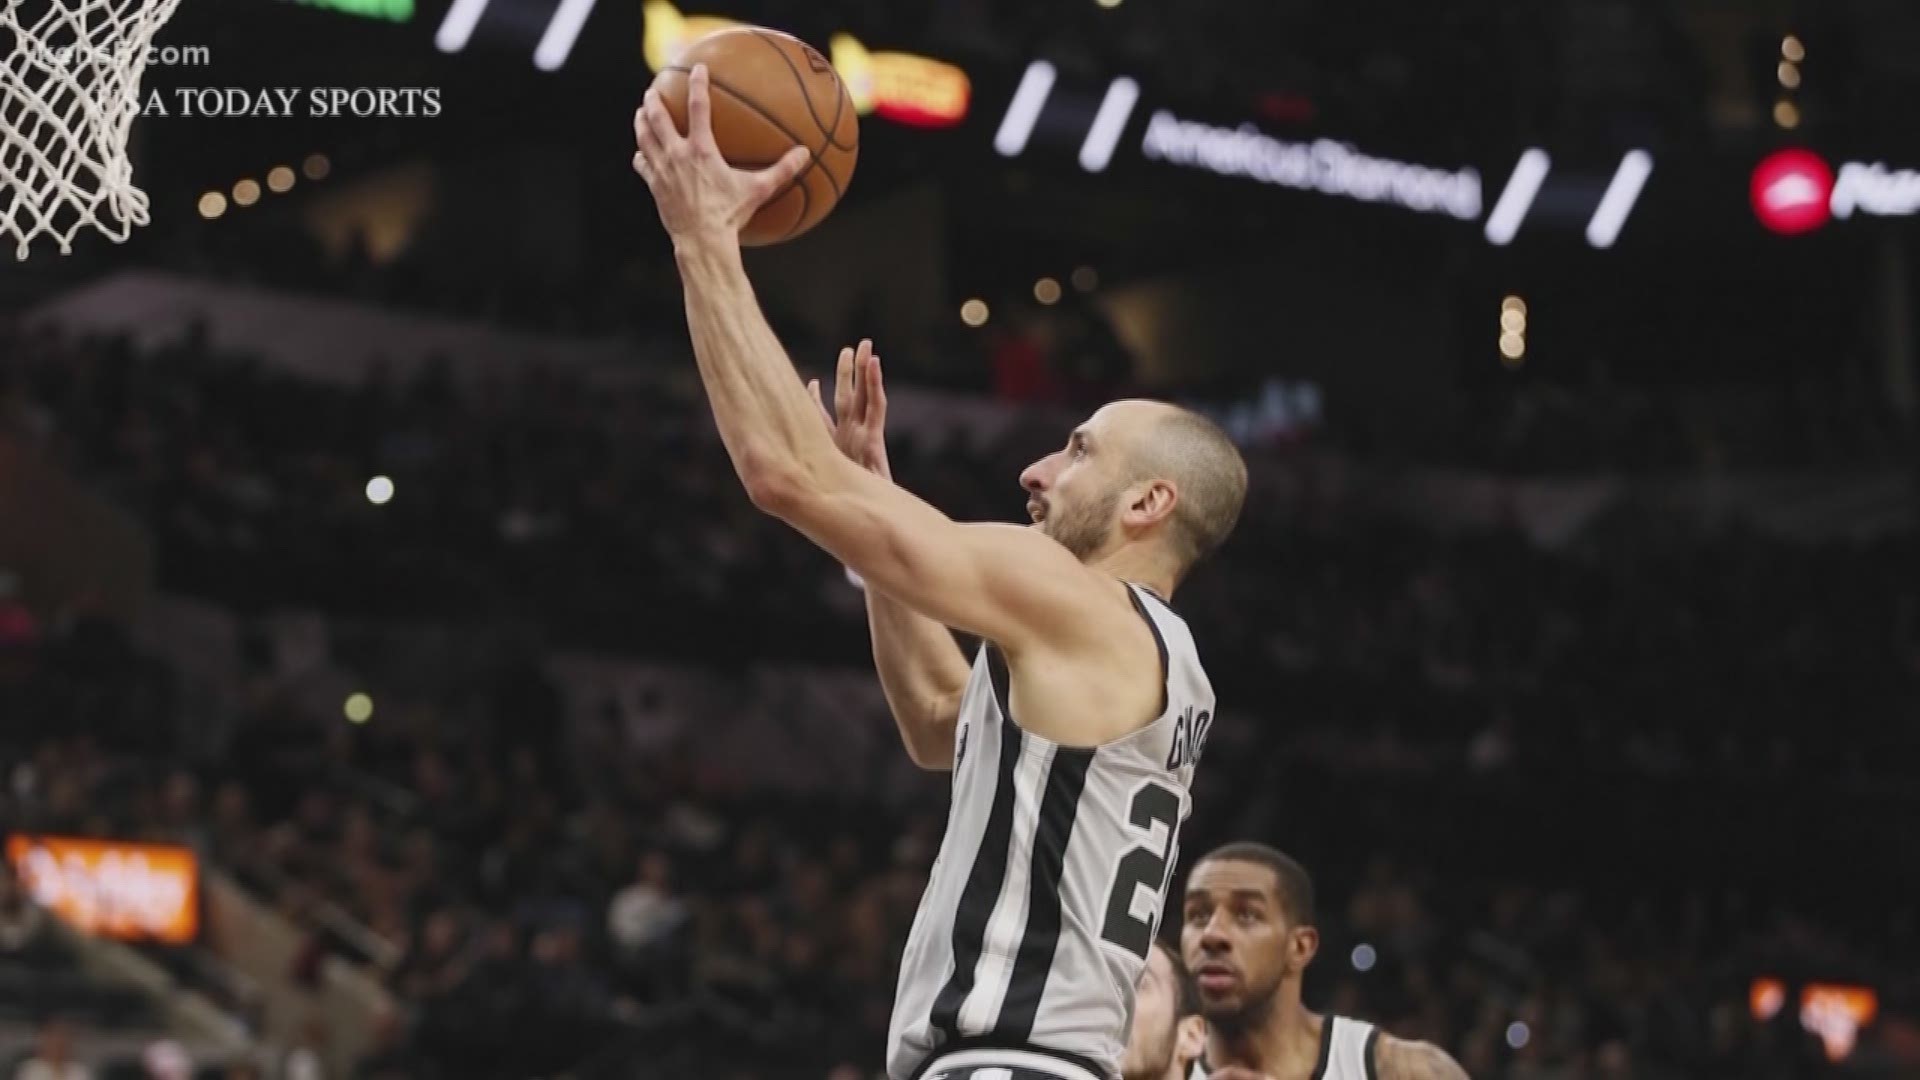 Ginobili officially spoke at a press conference about his retirement from the Spurs.